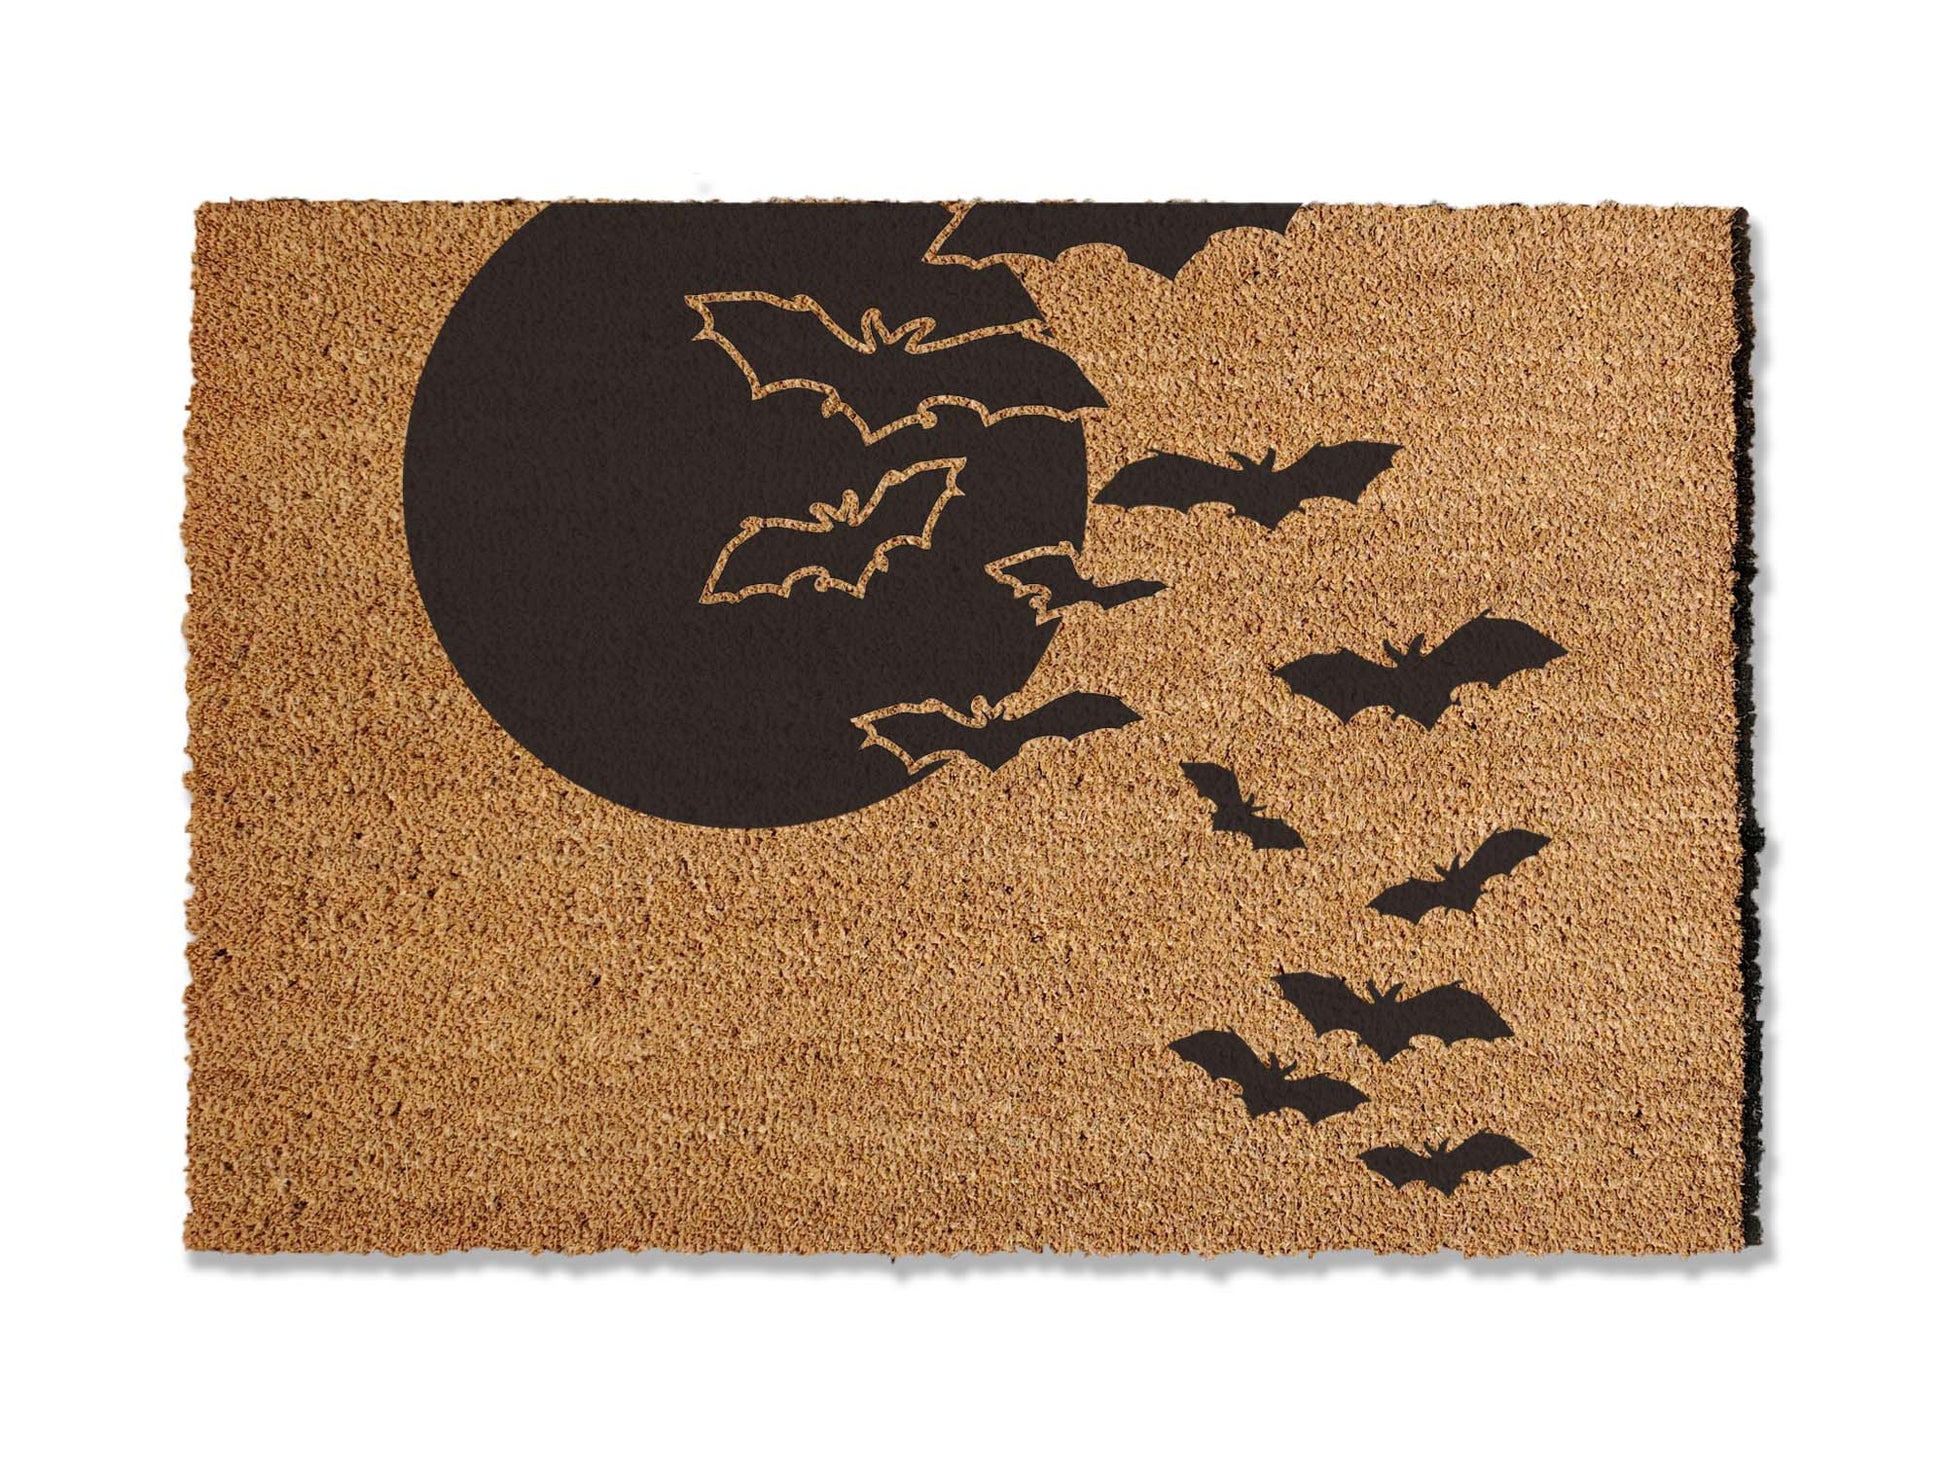 A coir doormat that is 24 inches by 36 inches and has a colony of bats flying towards a full moon painted on it.